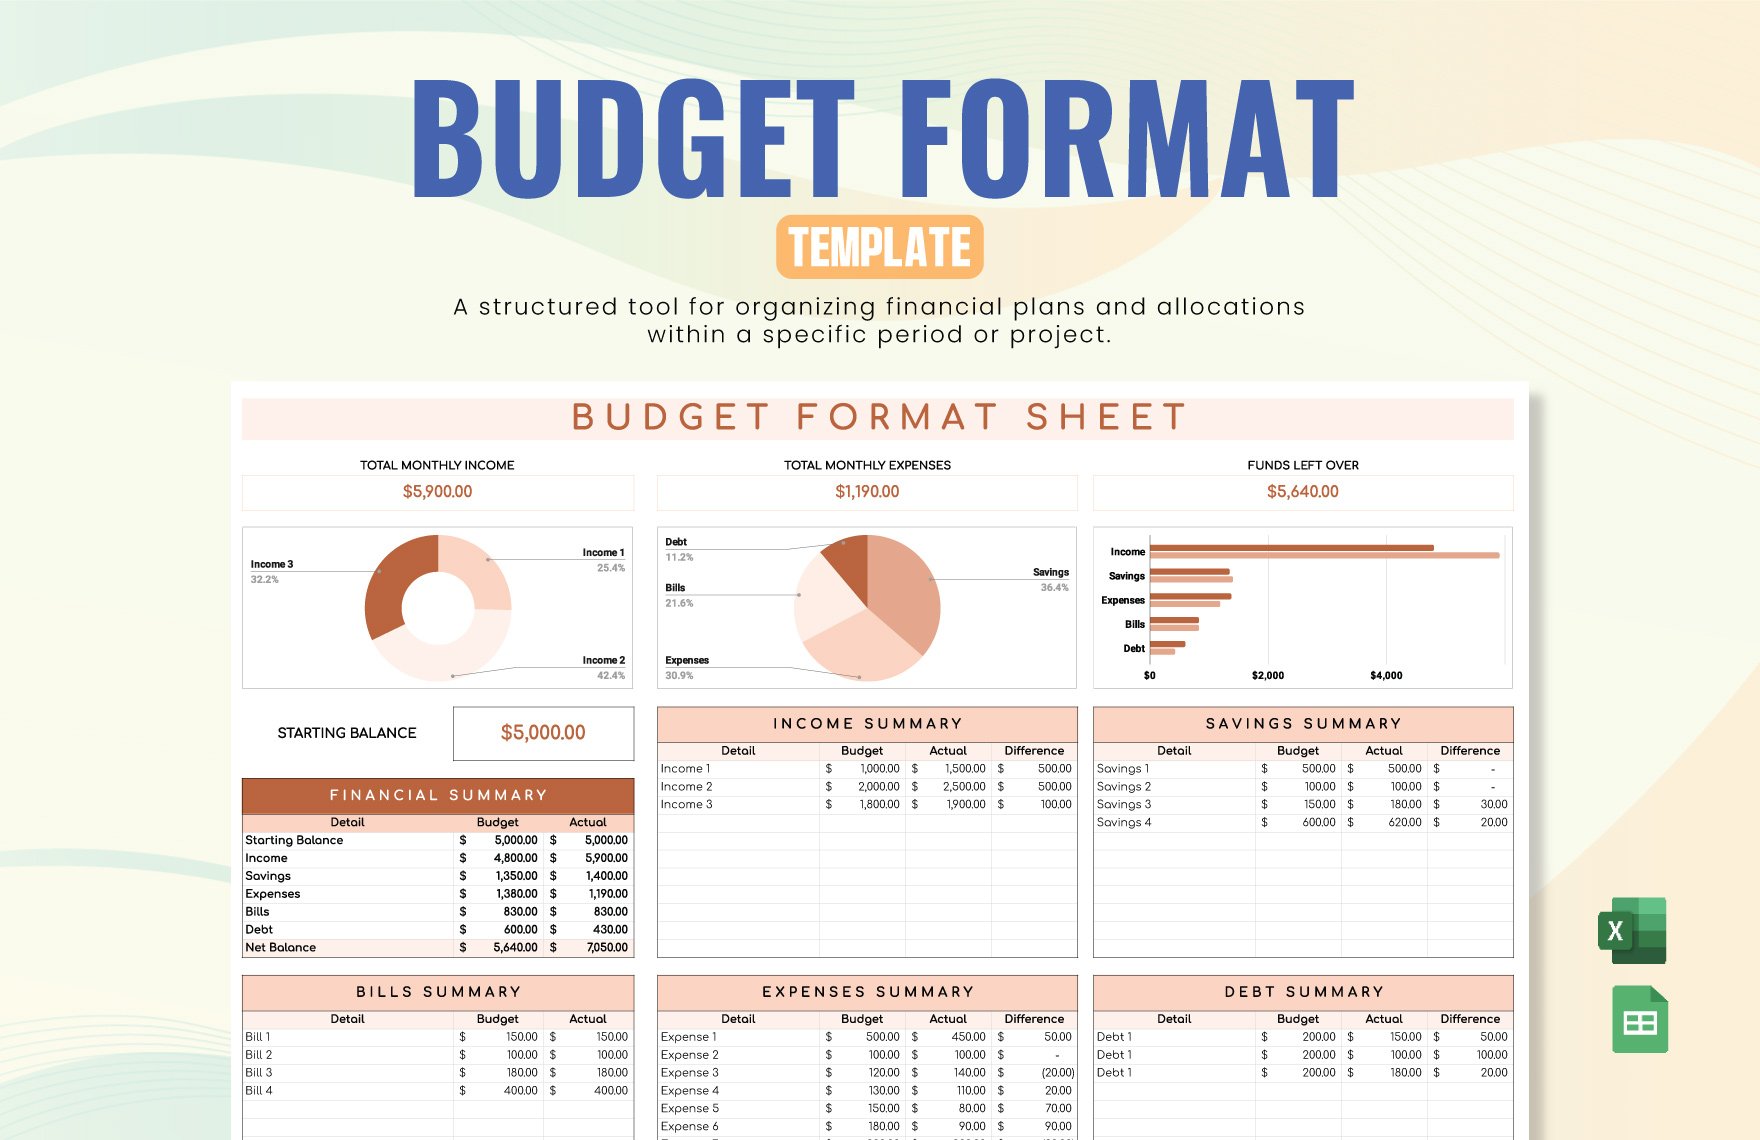 Free Budget Format Template in Excel, Google Sheets